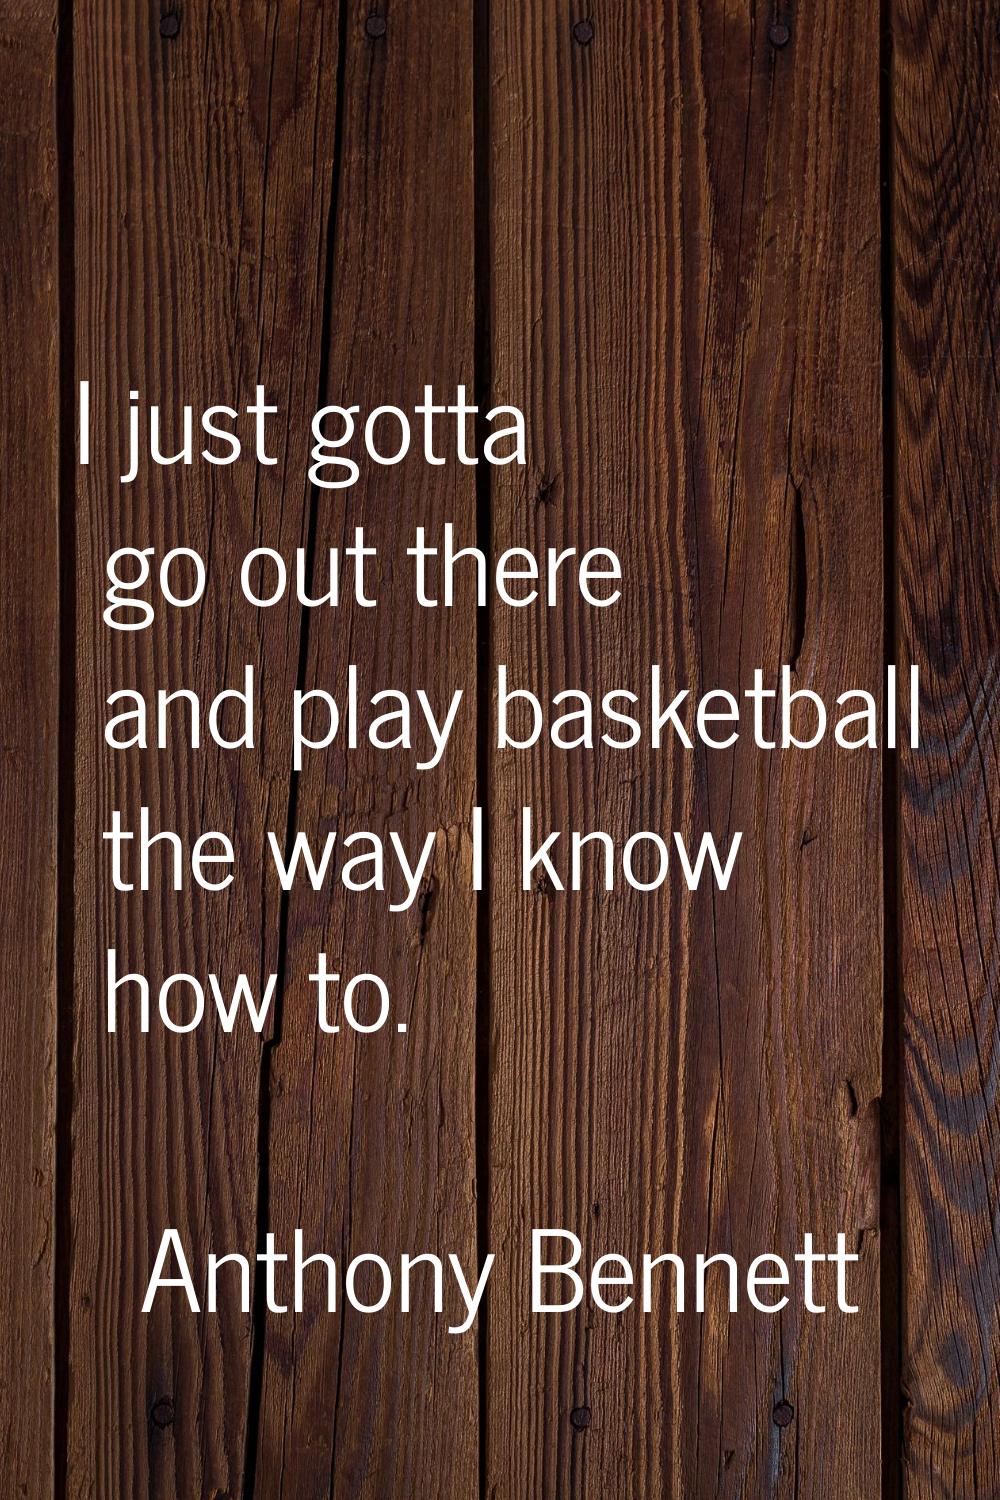 I just gotta go out there and play basketball the way I know how to.